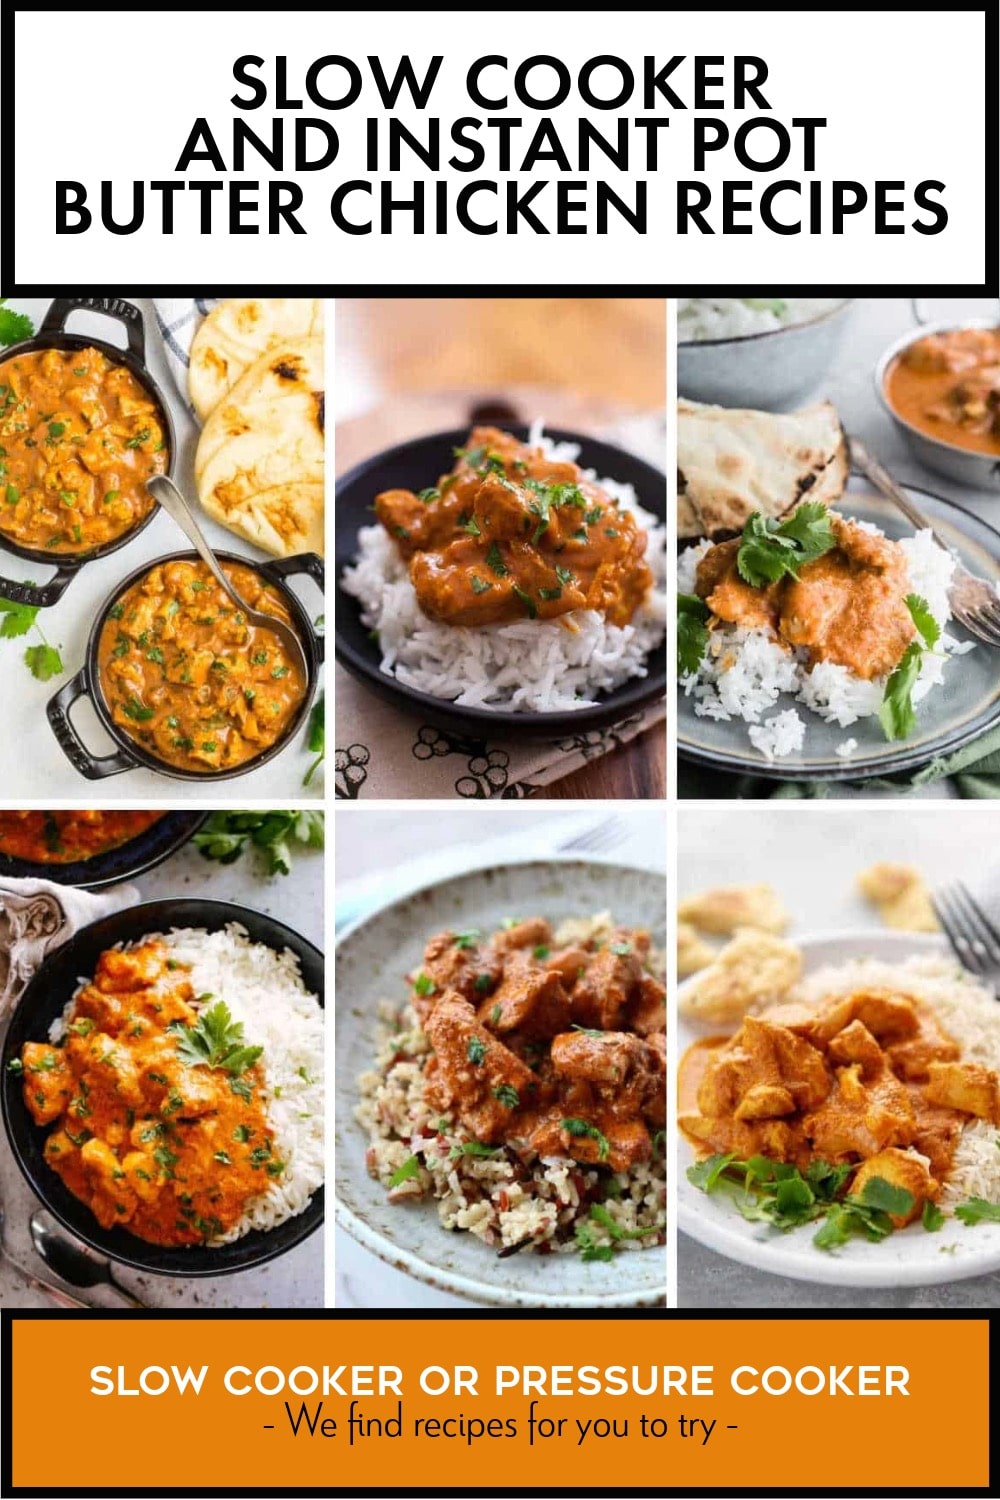 Pinterest image of Slow Cooker and Instant Pot Butter Chicken Recipes